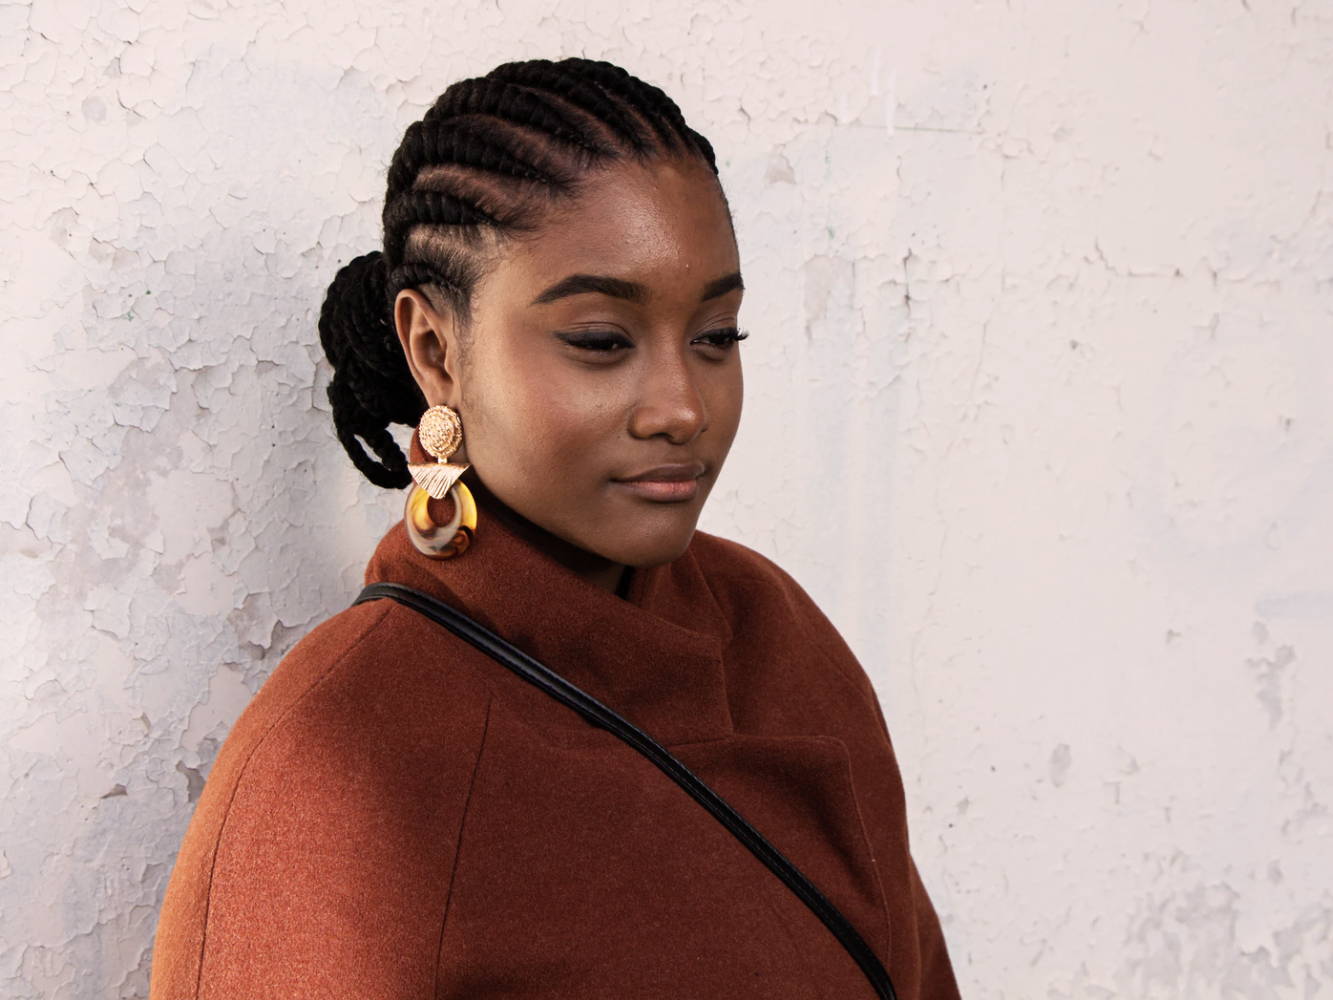 How To Care For Your Scalp While Wearing Braids And Twists The look is intricate, feminine, and always inspiring. your scalp while wearing braids and twists